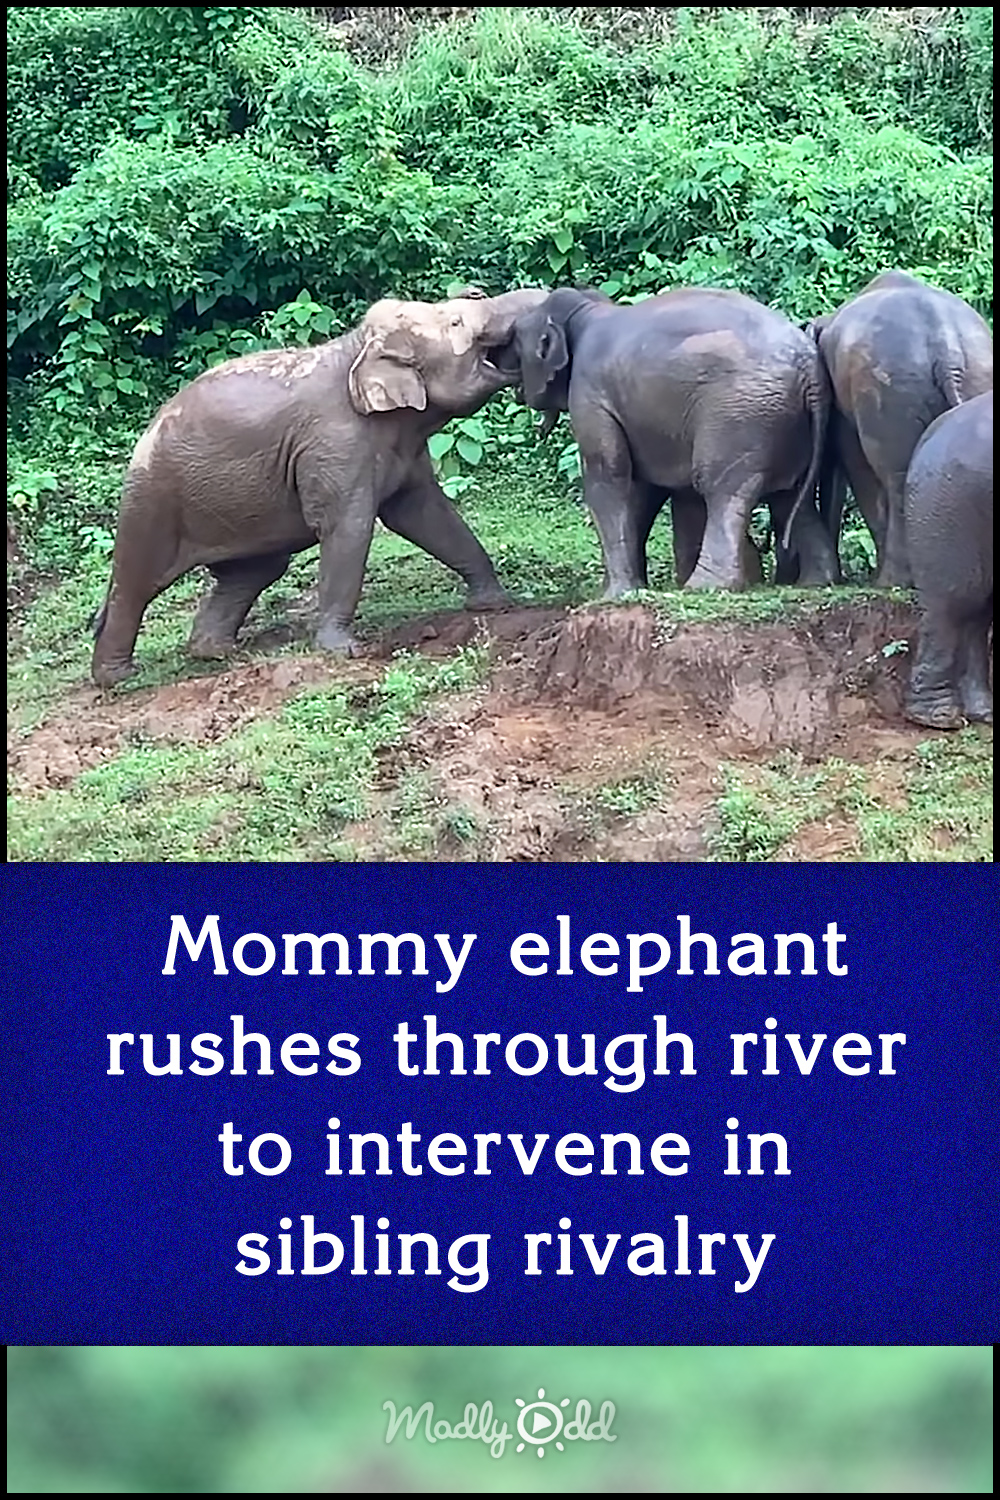 Mommy elephant rushes through river to intervene in sibling rivalry